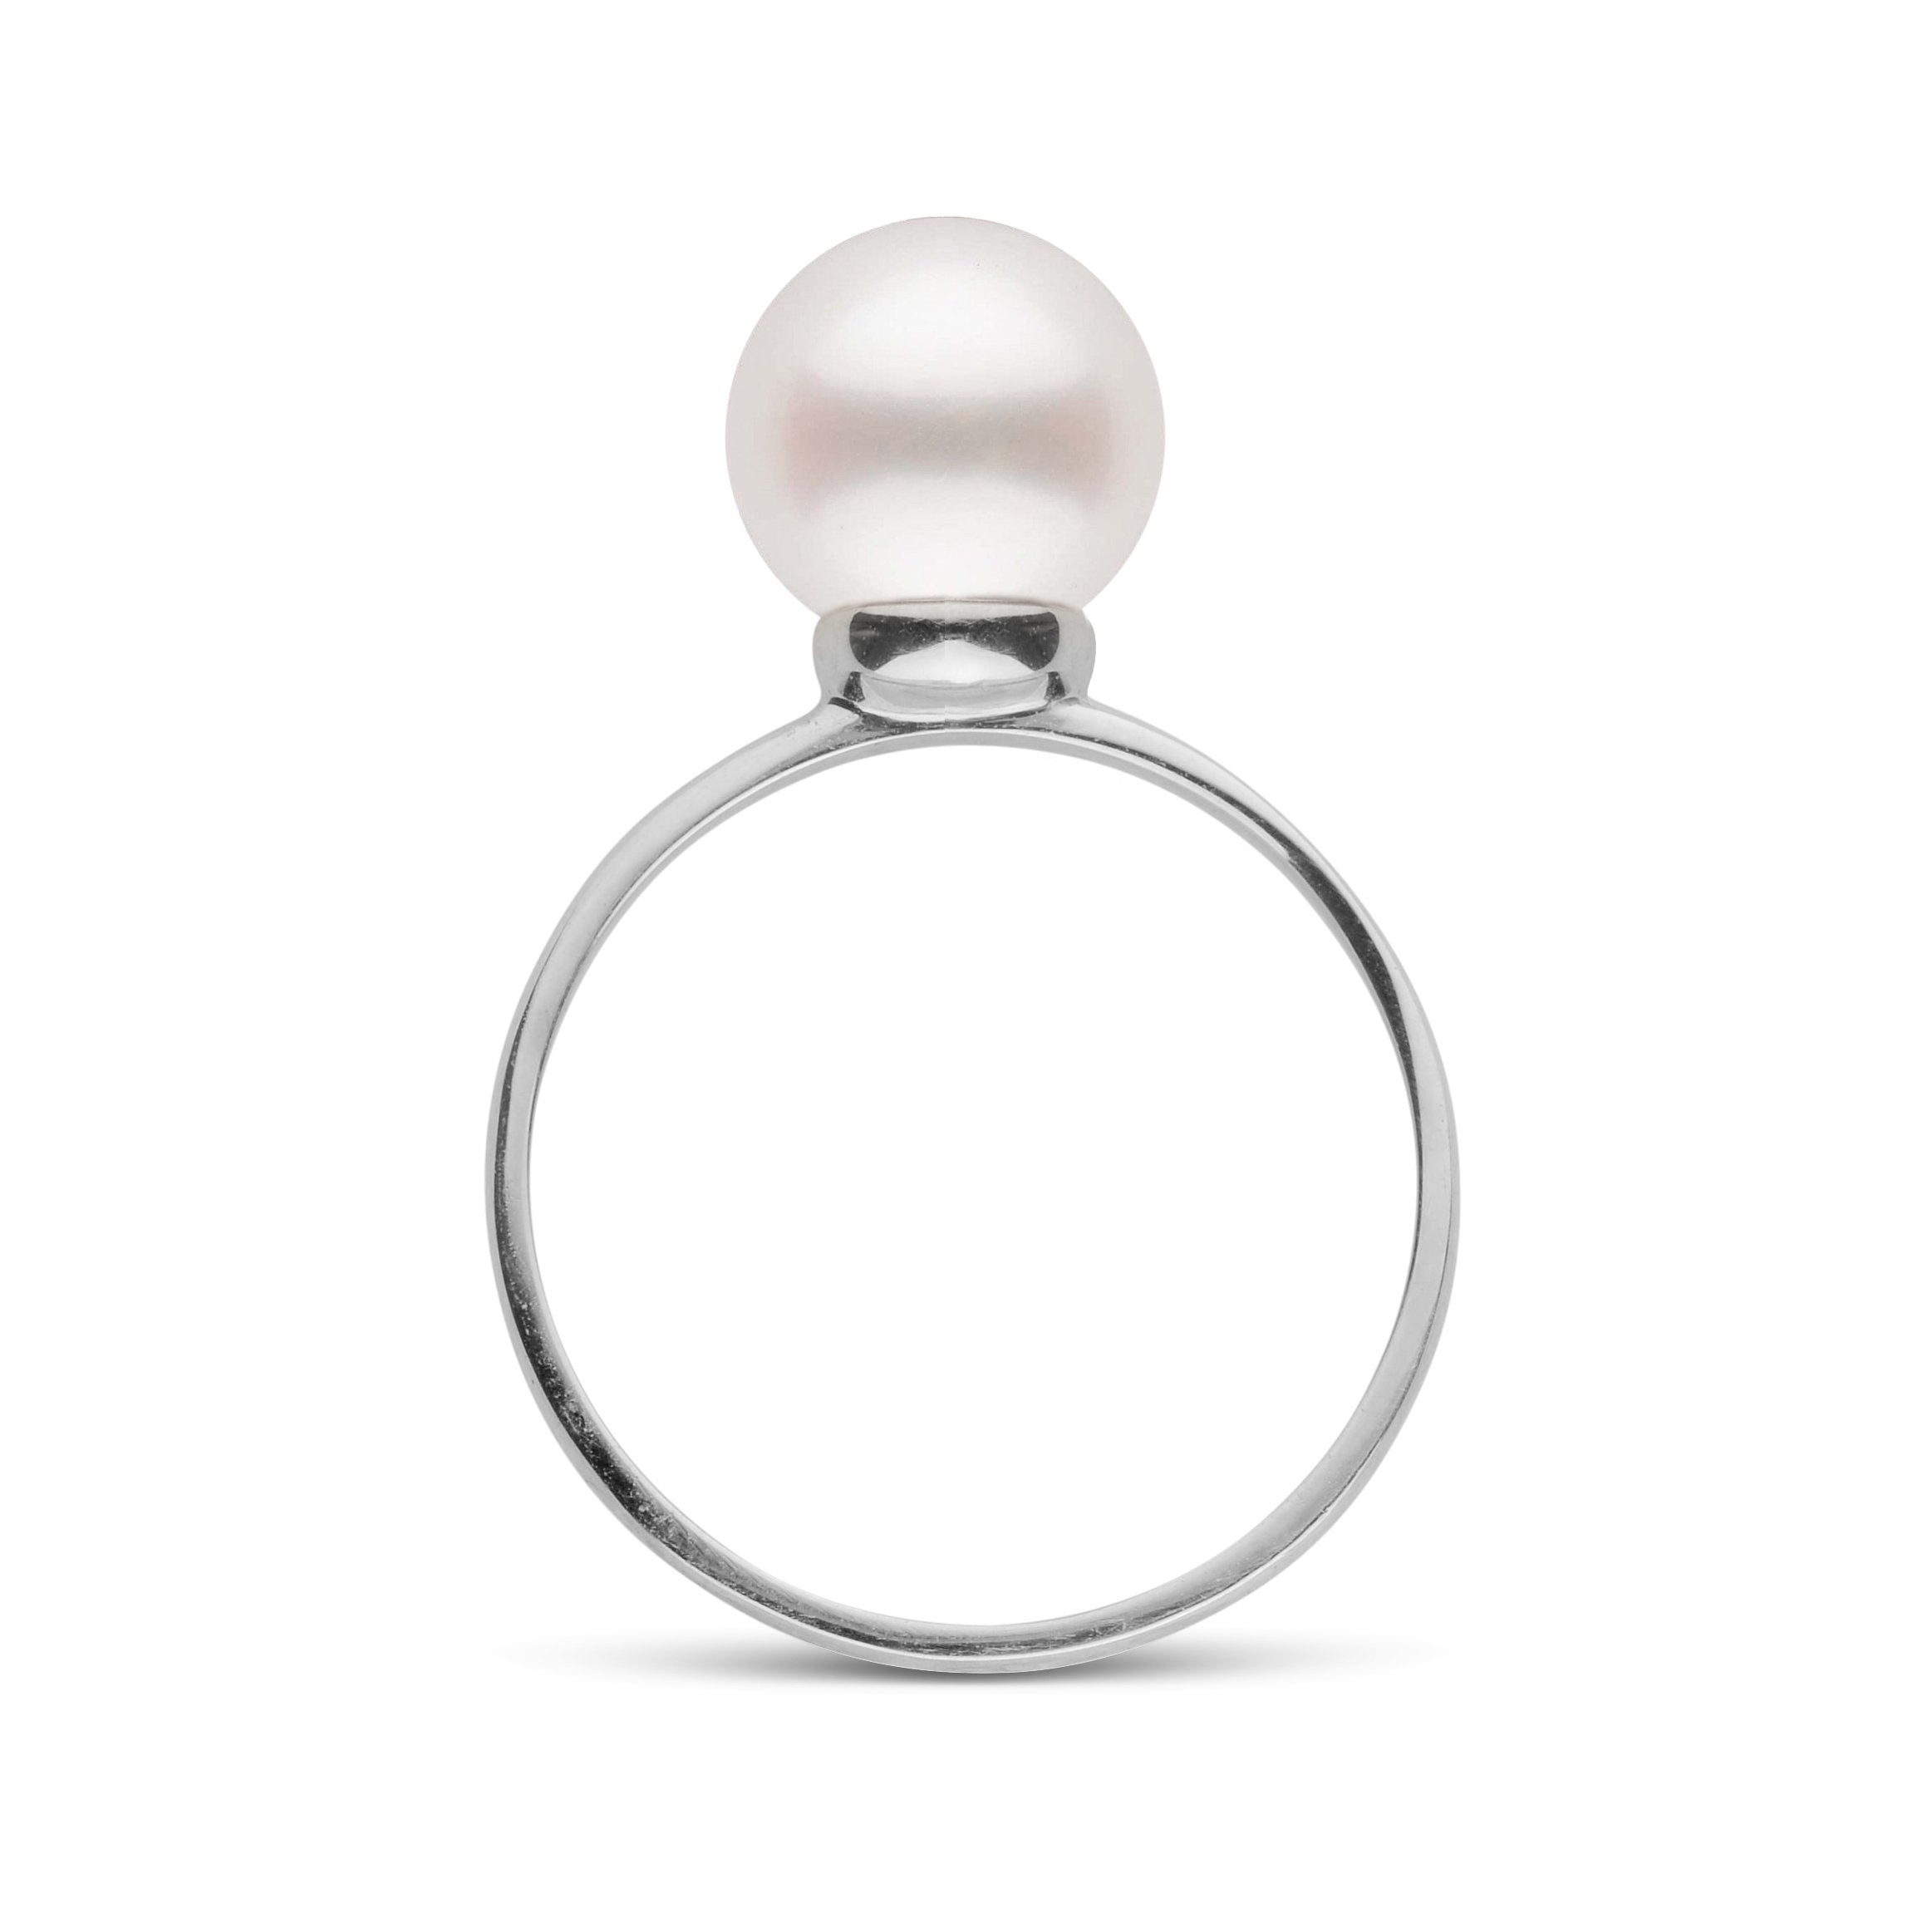 Bridge Collection 8.5-9.0 mm Akoya Pearl Ring 14K Yellow Gold / 6 by Pearl Paradise